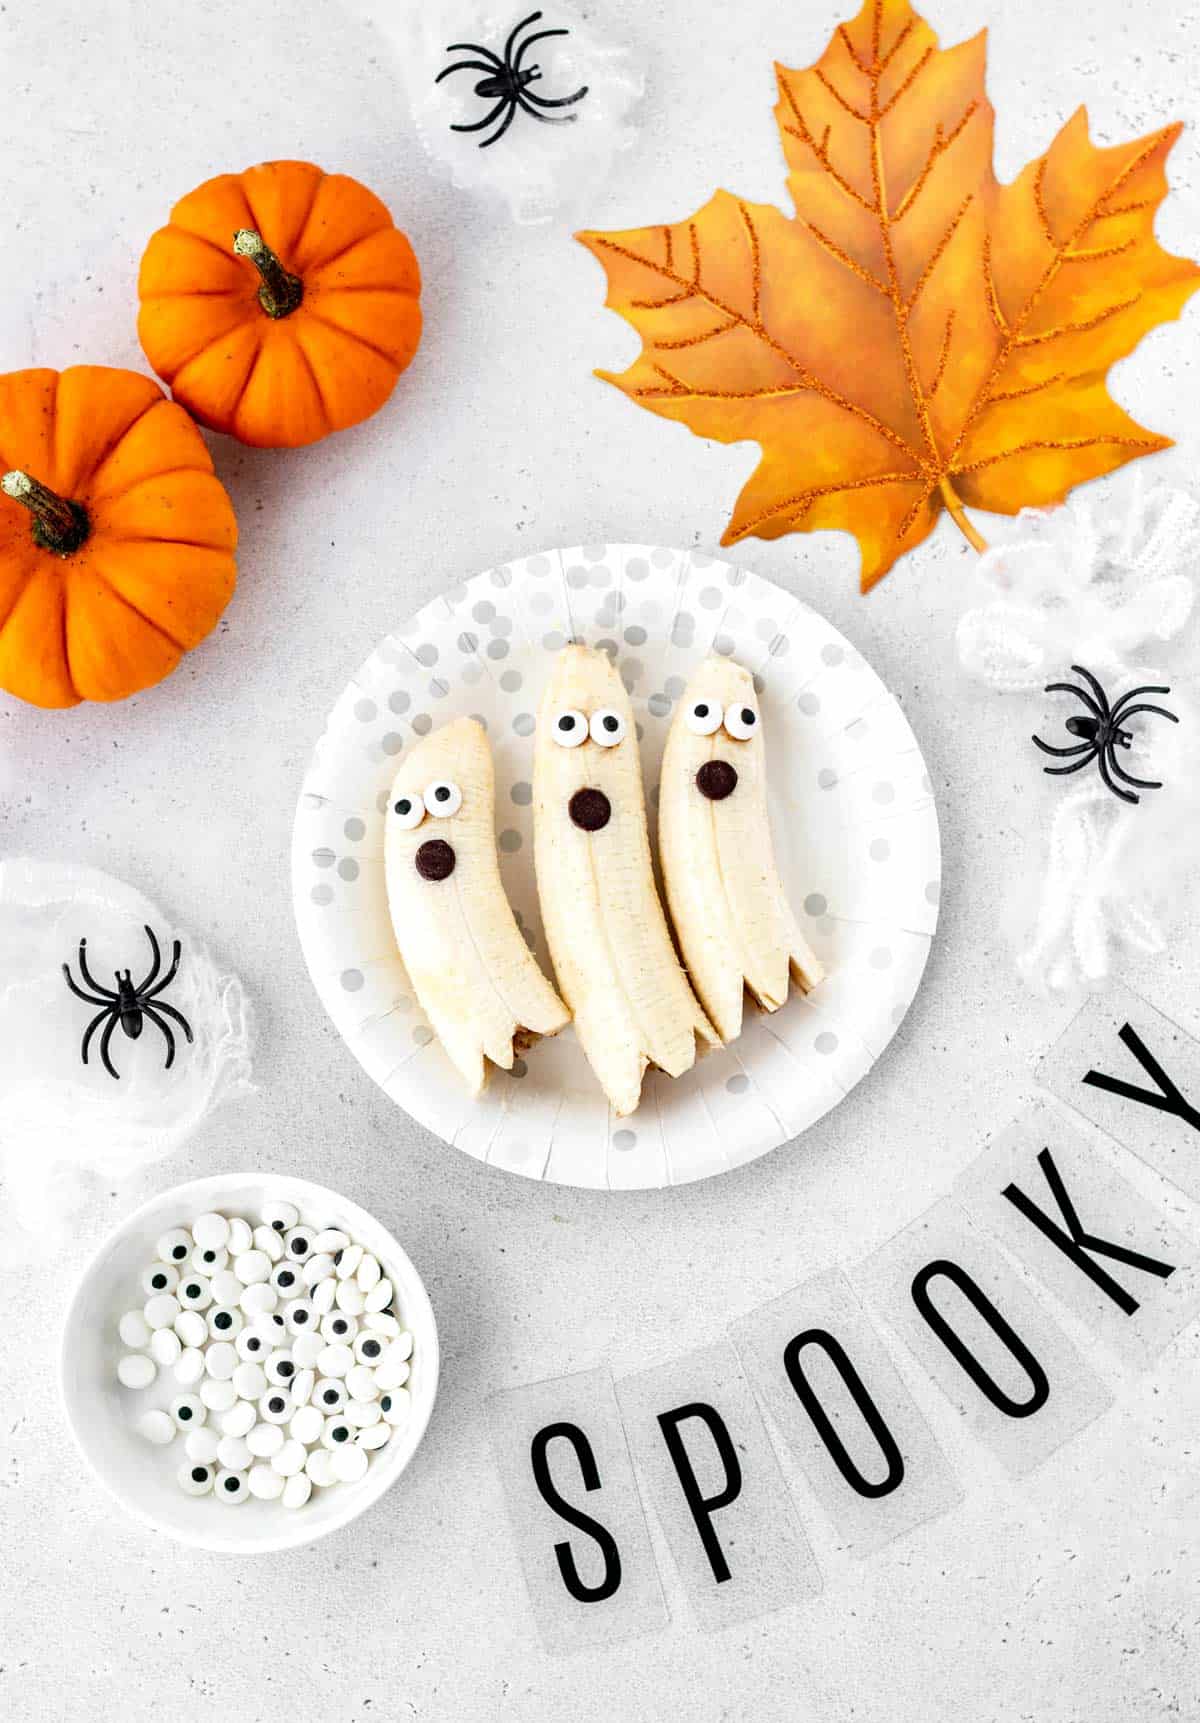 Three banana ghosts on a plate with Halloween decorations.